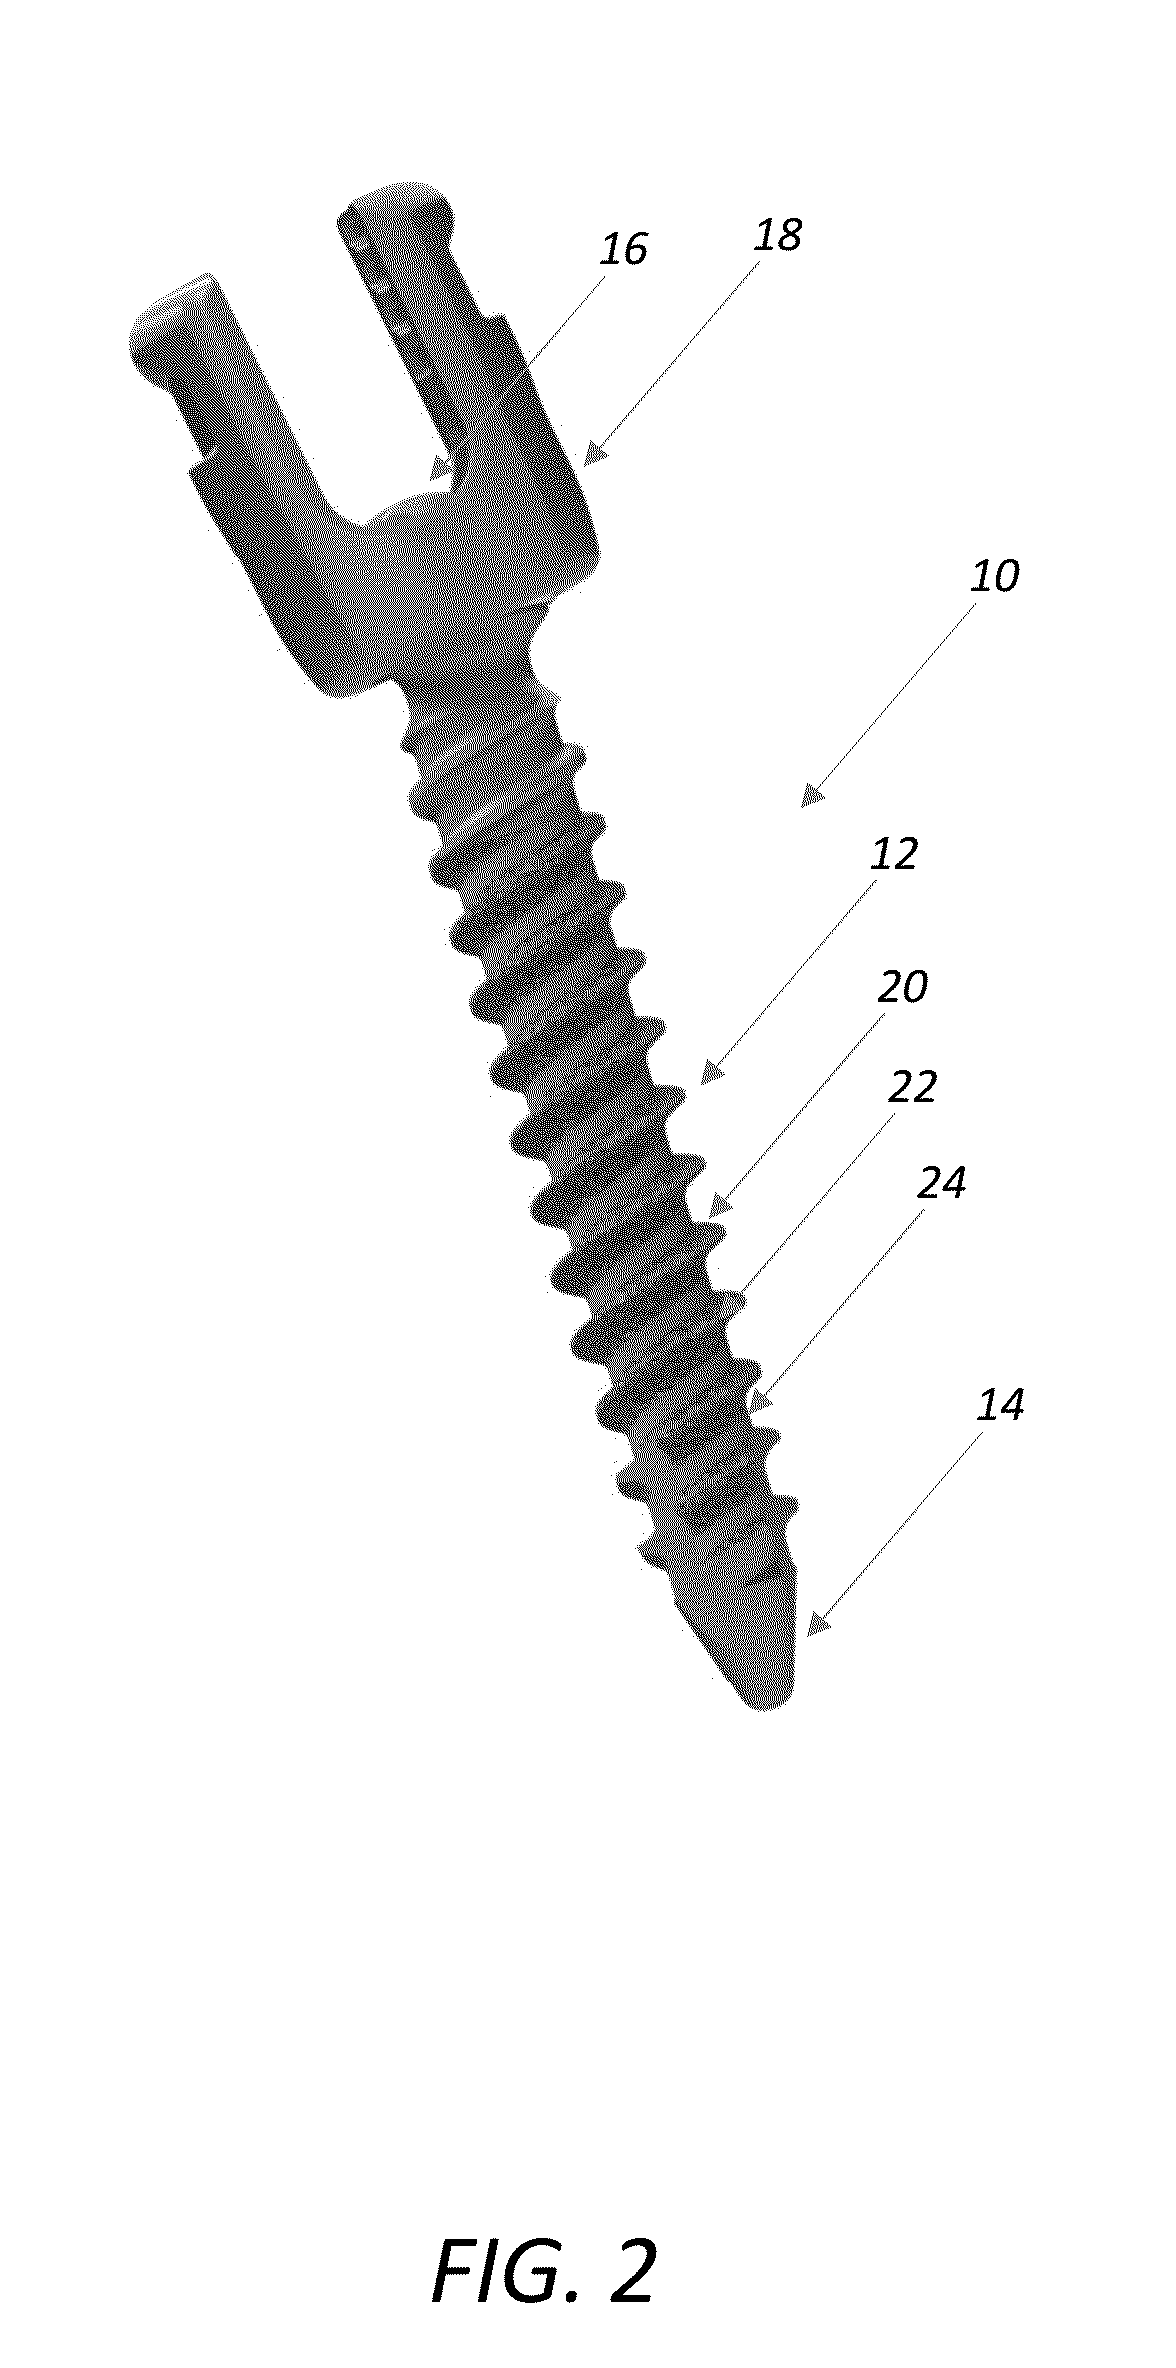 Bone screw incorporating a porous surface formed by an additive manufacturing process